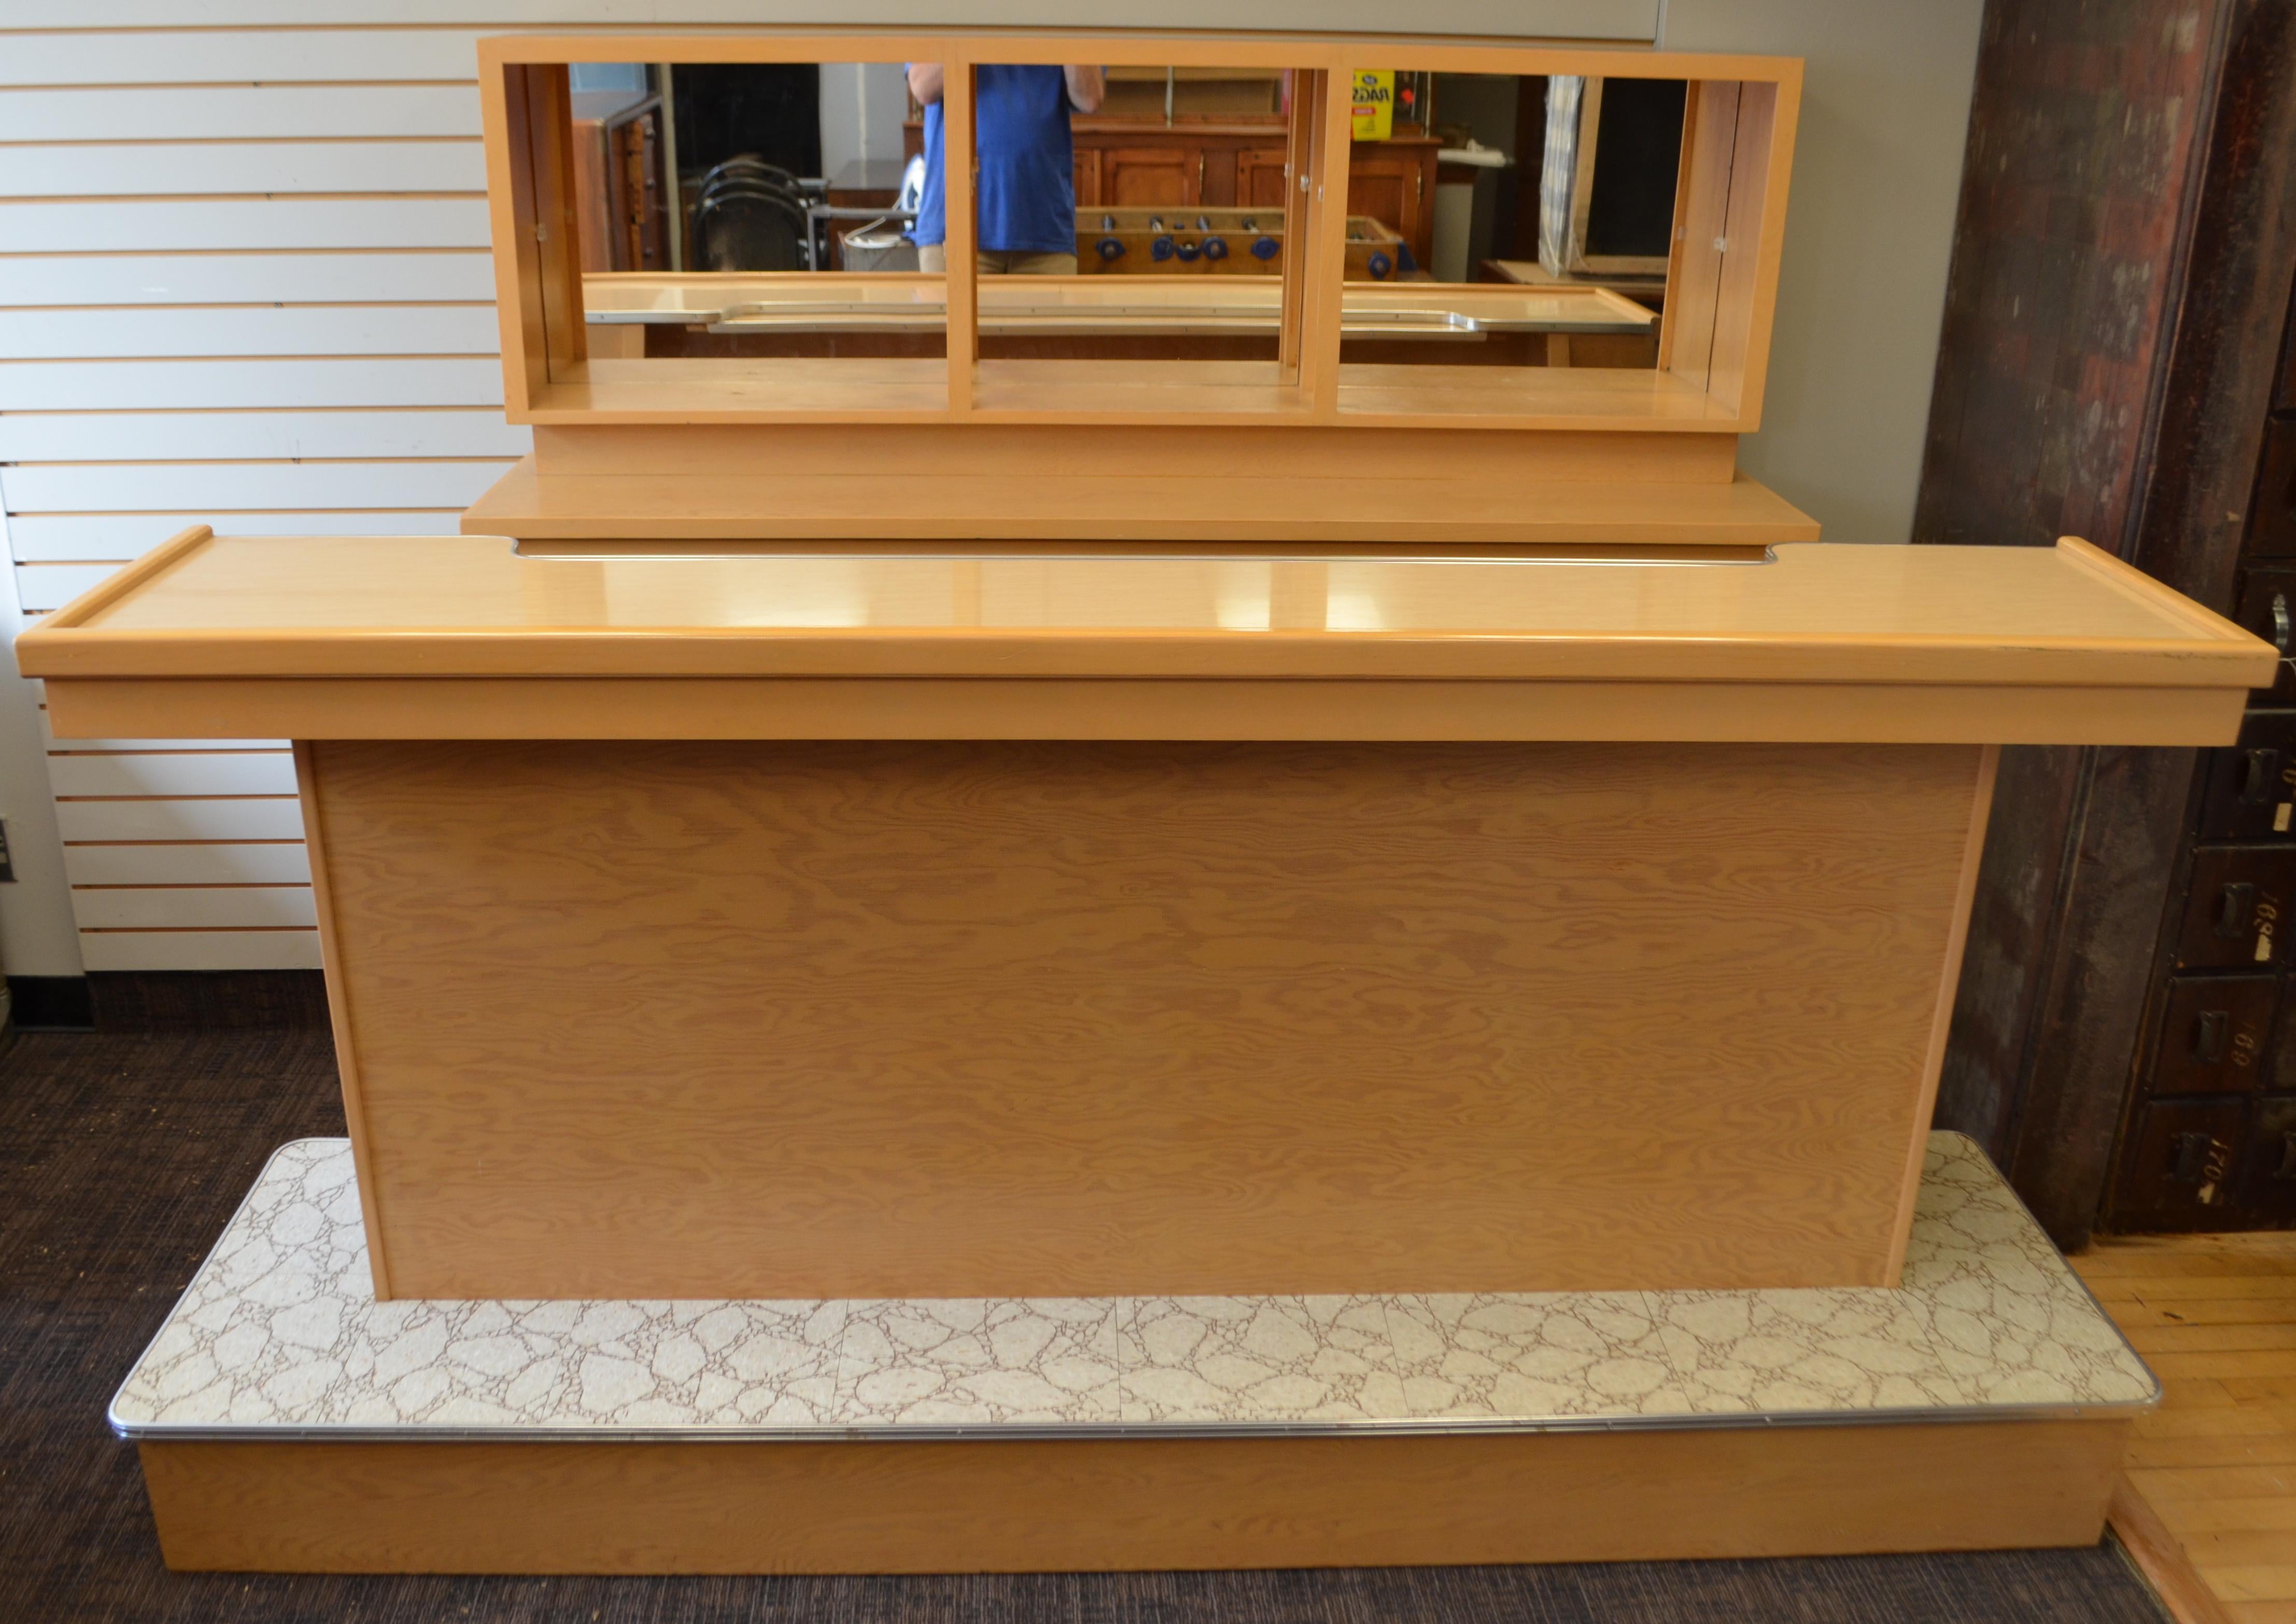 Classic mid century front and back bar for home and office events. You can even shift this from room to room or event to event if you choose since it's two freestanding pieces, neither very heavy. Offers prodigious storage. Perfect for